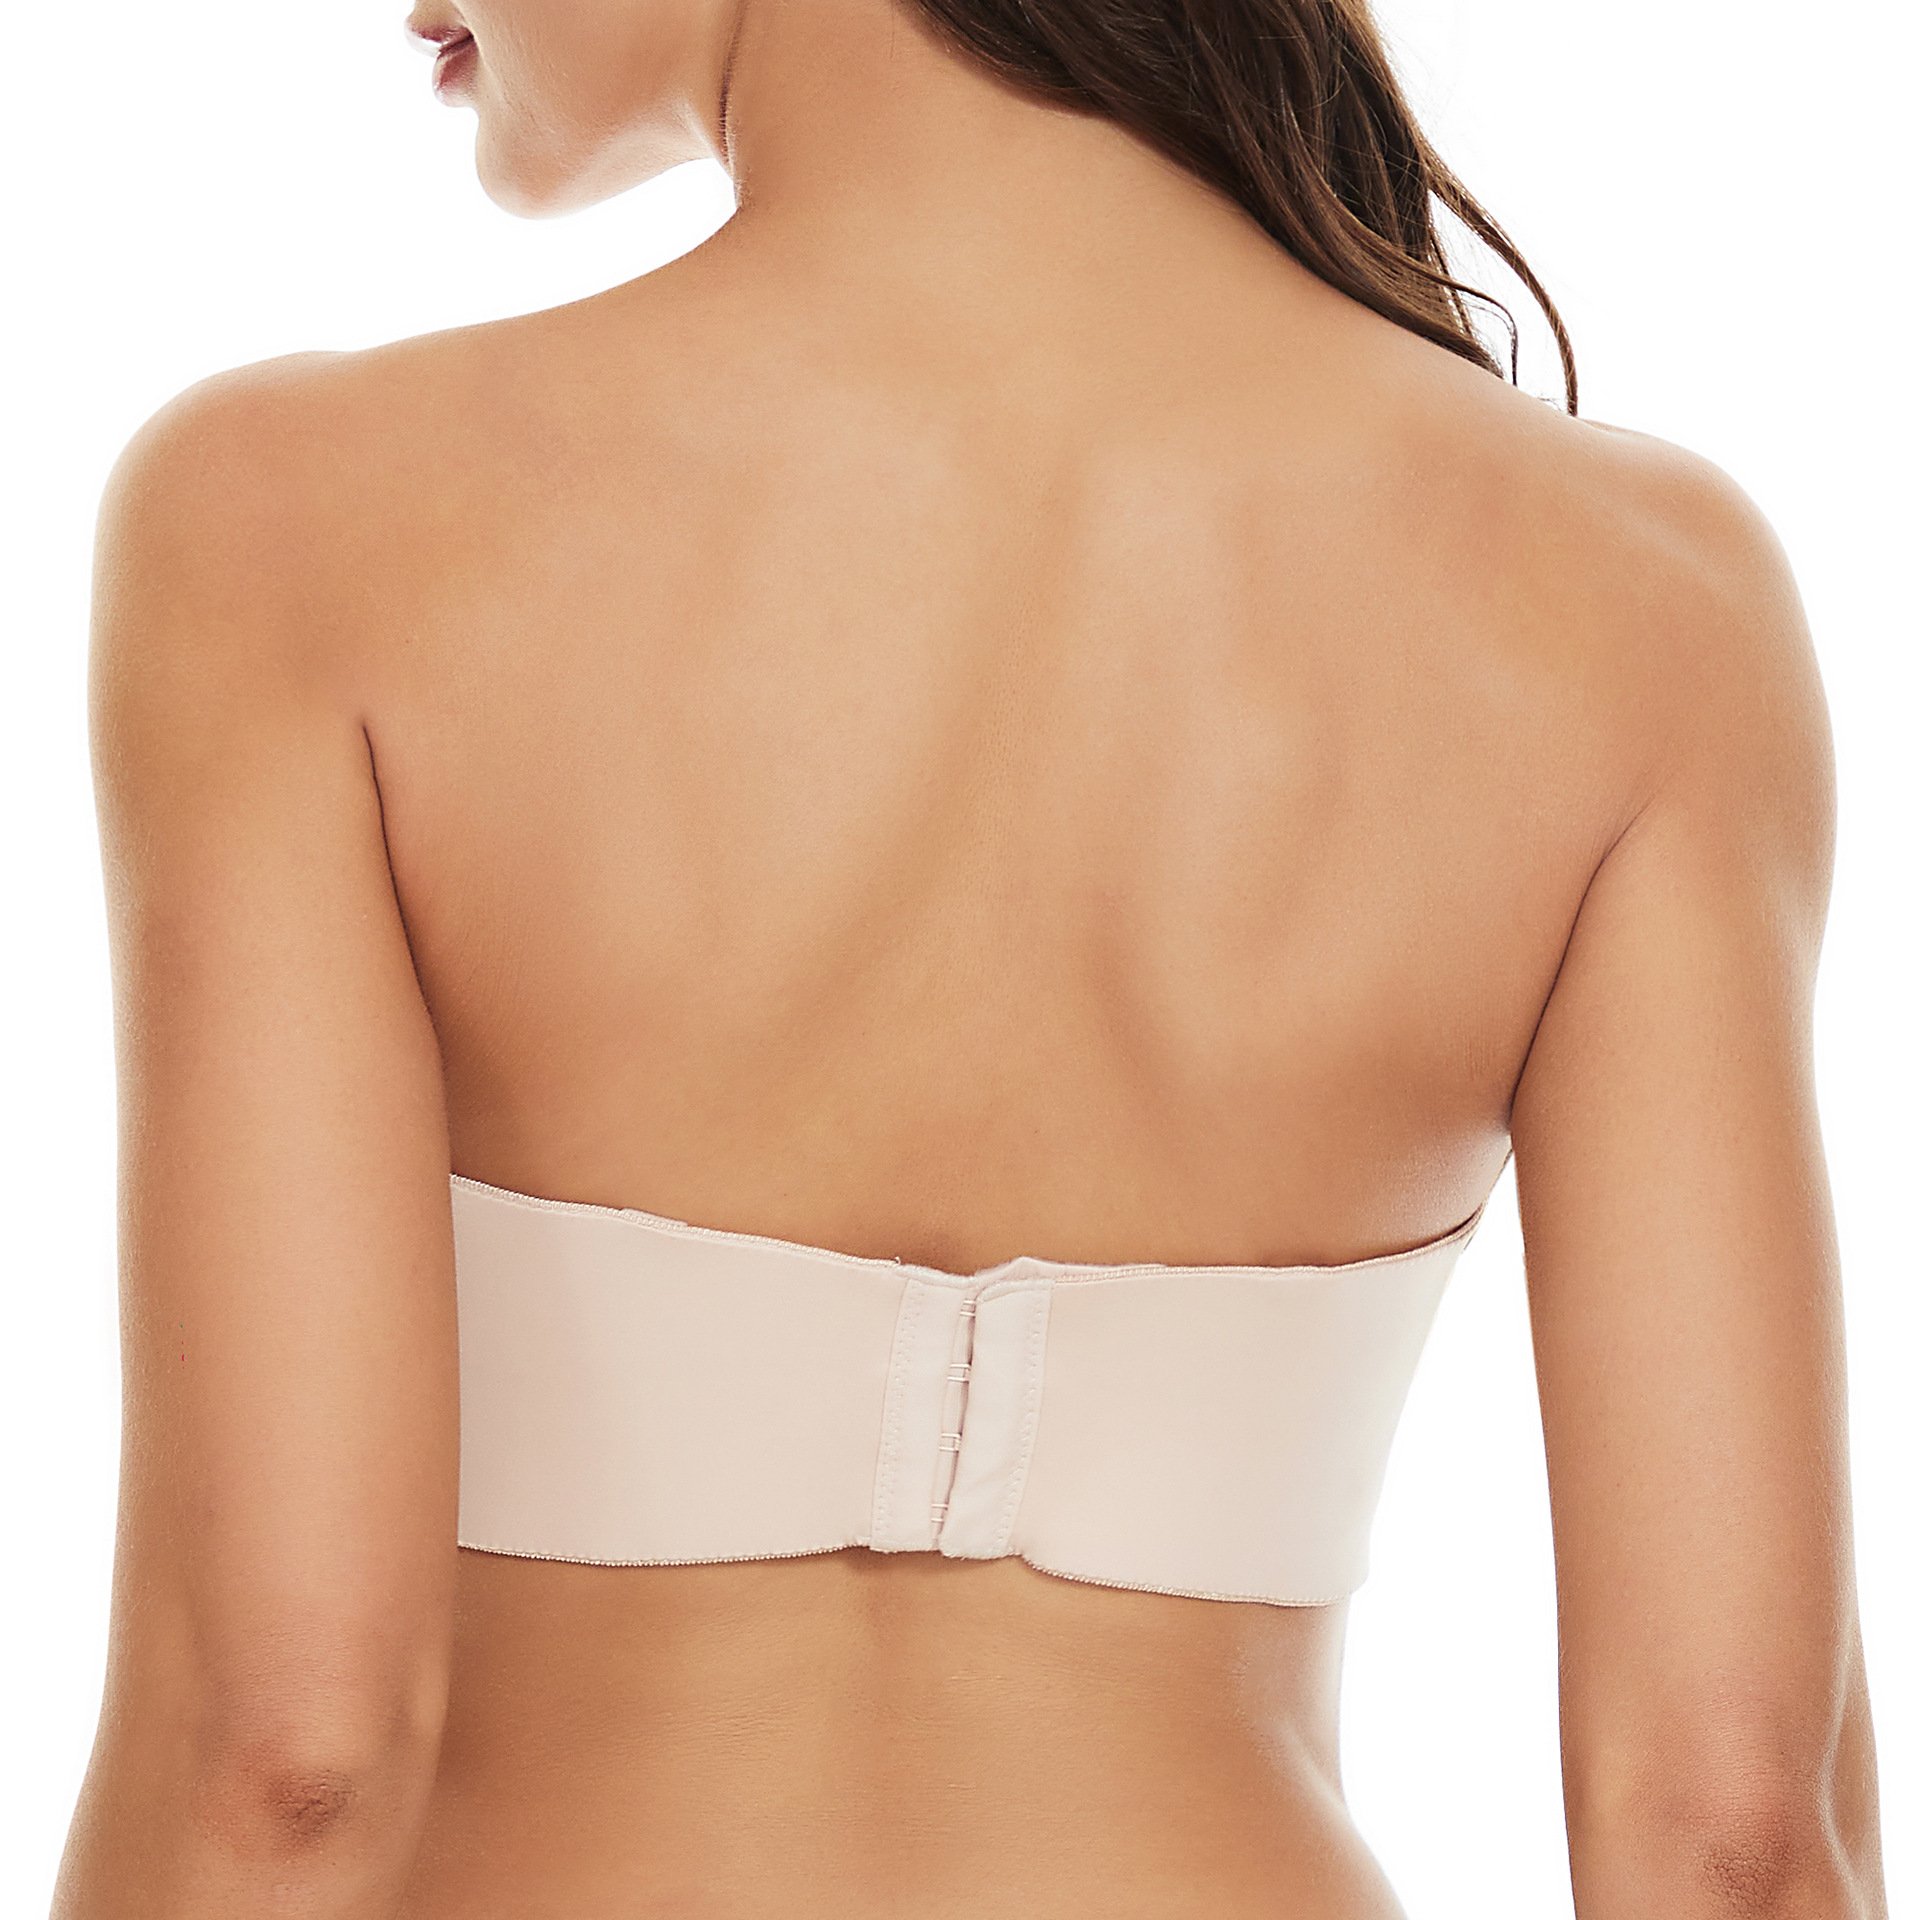 LAST DAY 49% OFF - Full Support Non-Slip Convertible Bandeau Bra (Buy 2 Free Shipping)